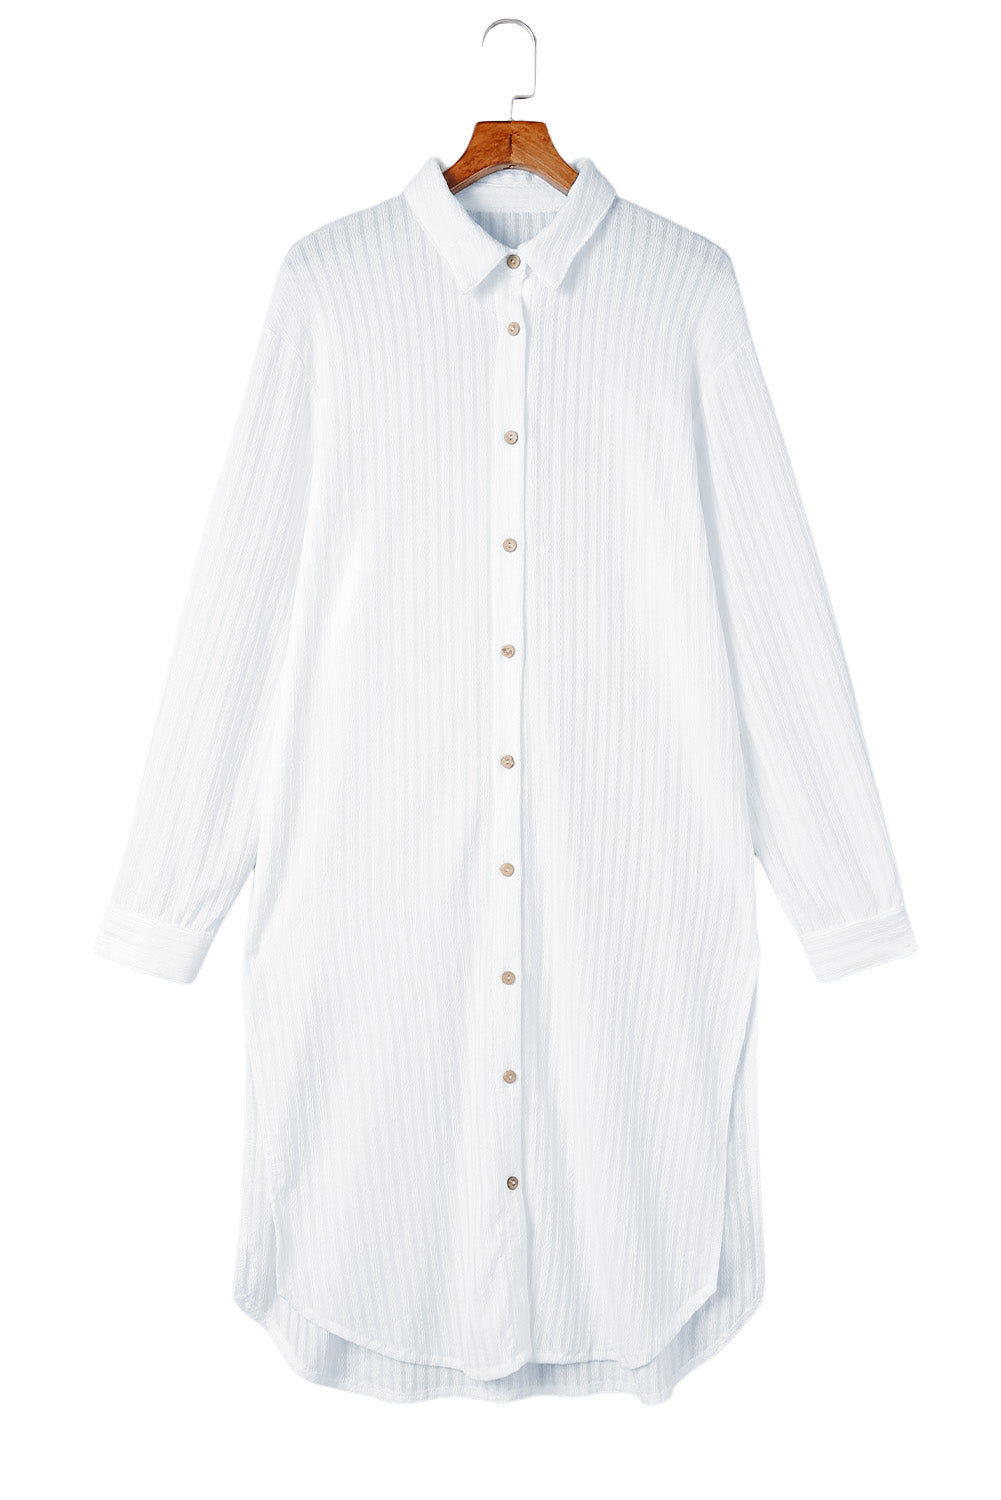 Striped Button Up Long Sleeve Swimsuit Cover Up